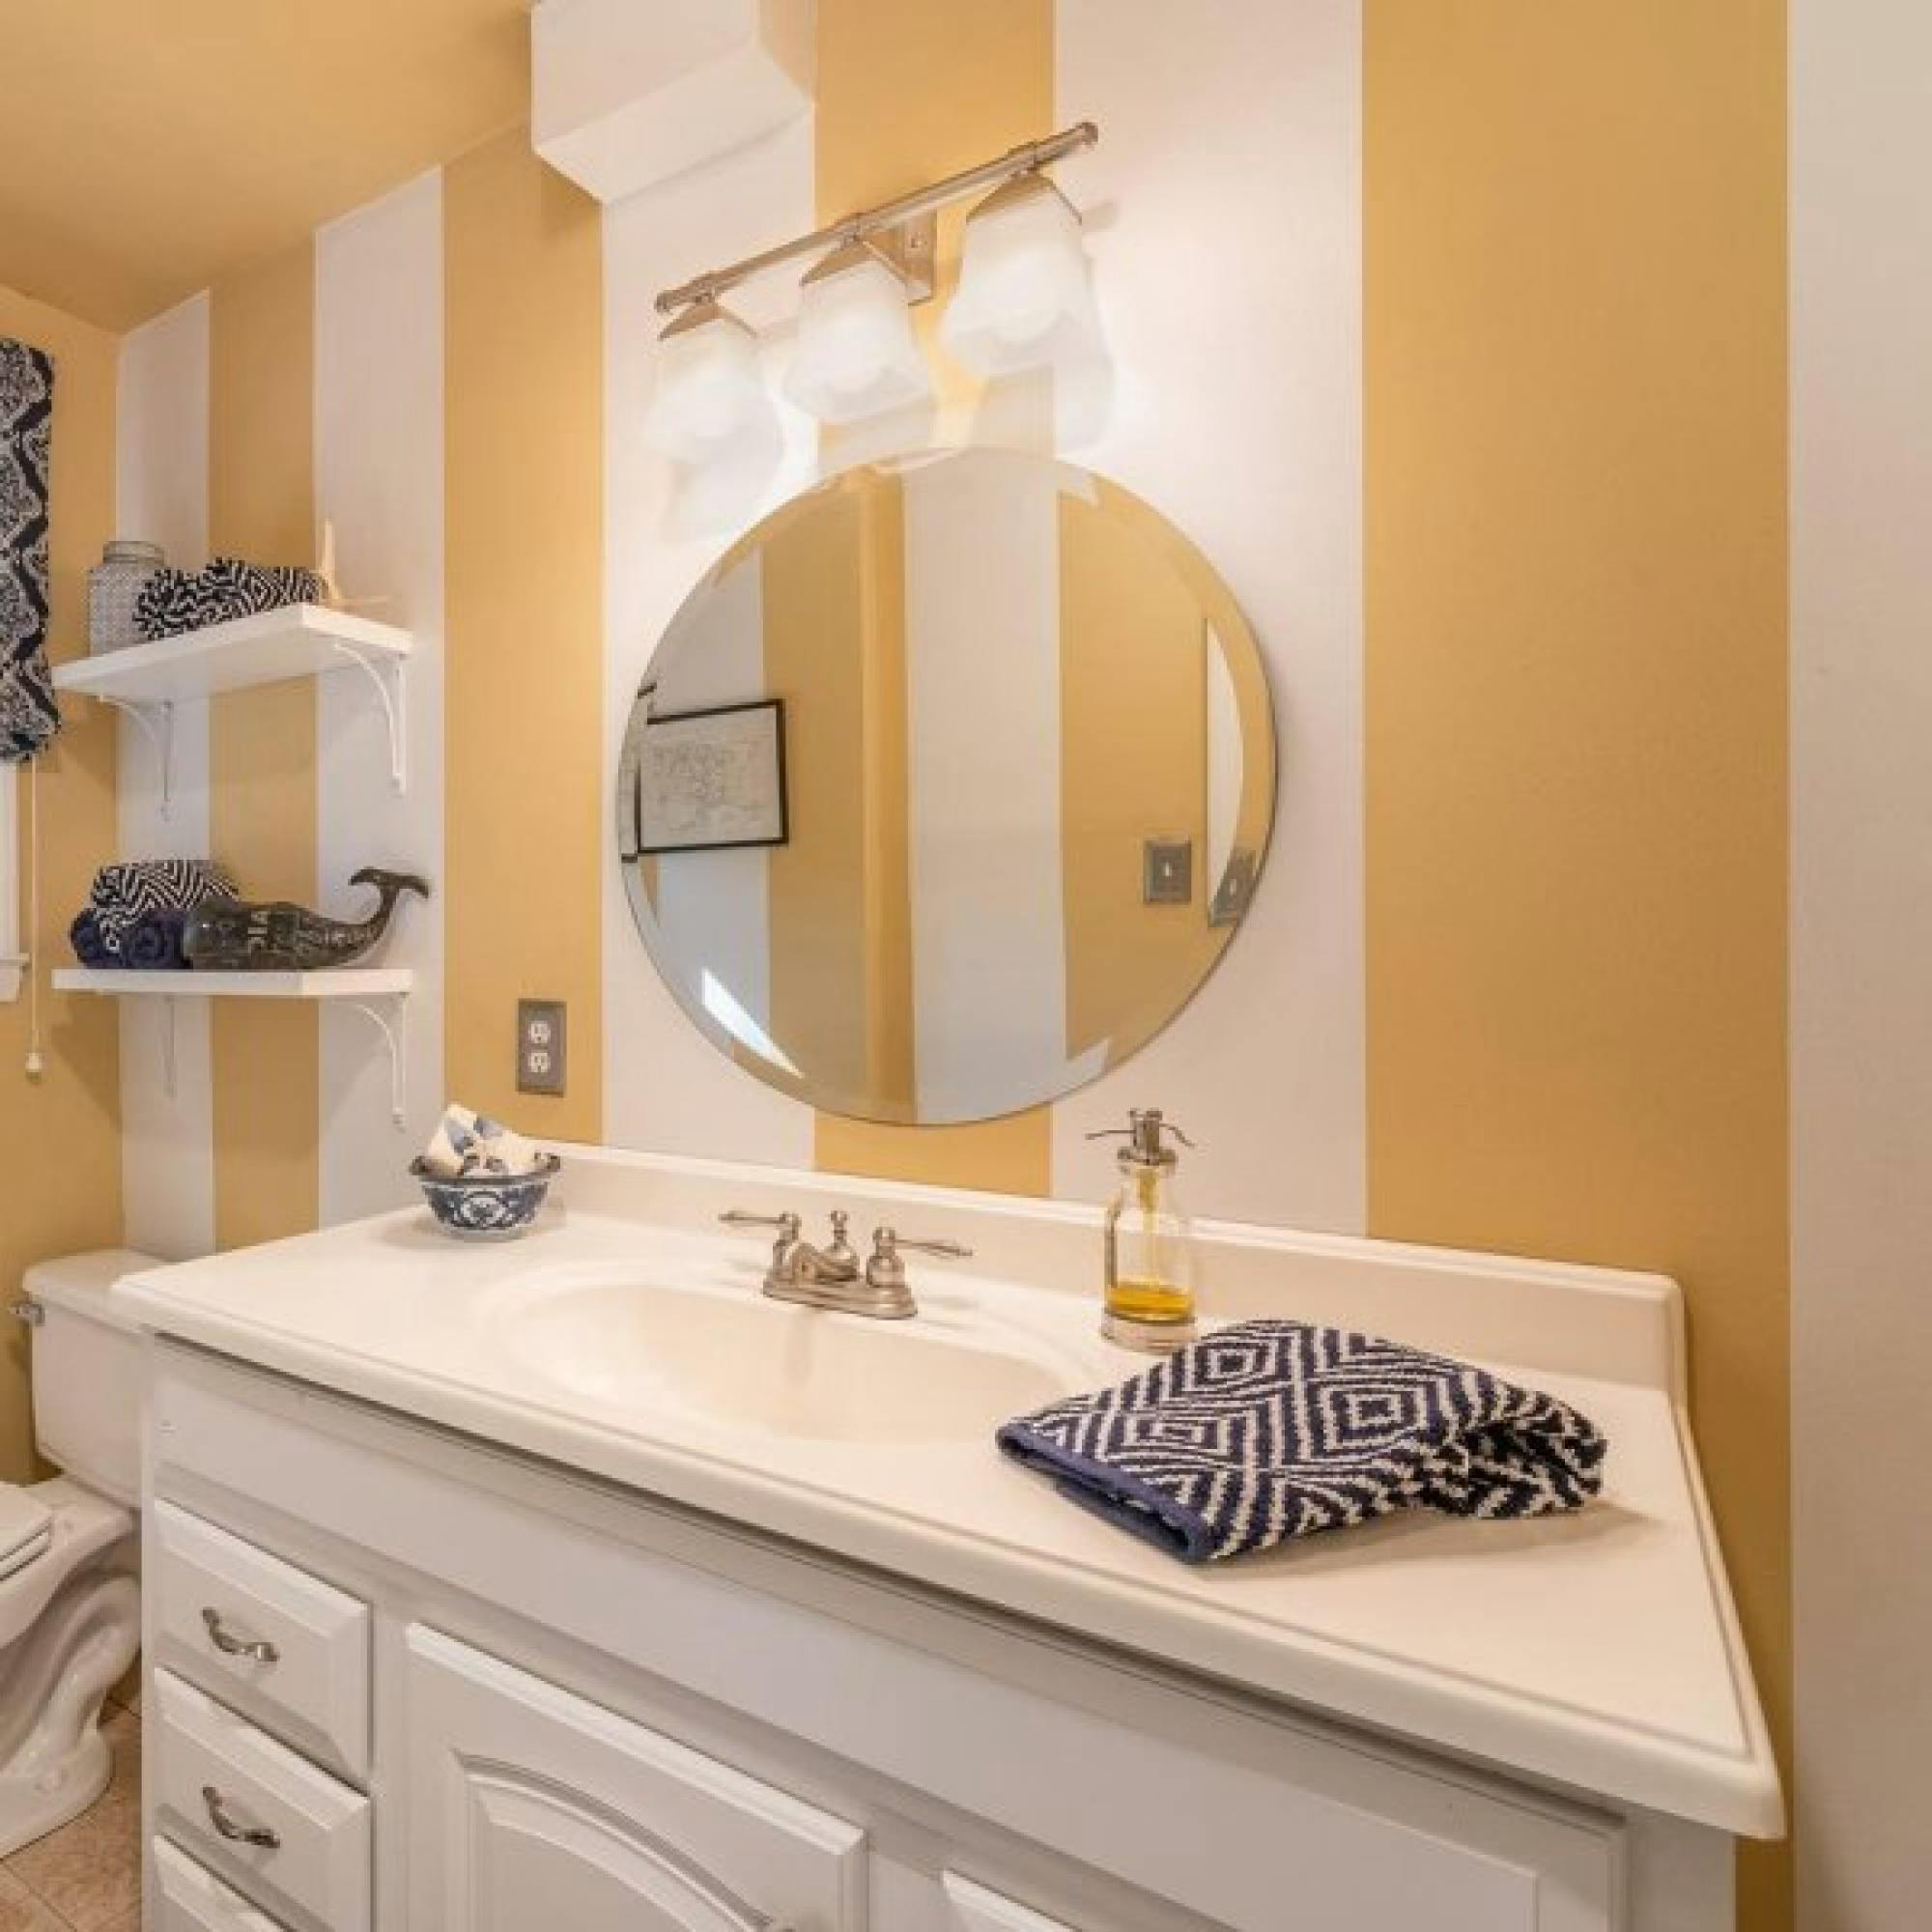 @idccarolinas painted their bathroom with stripes by using Sherwin-Williams, Blonde SW 6128 and Pure White SW 7005.